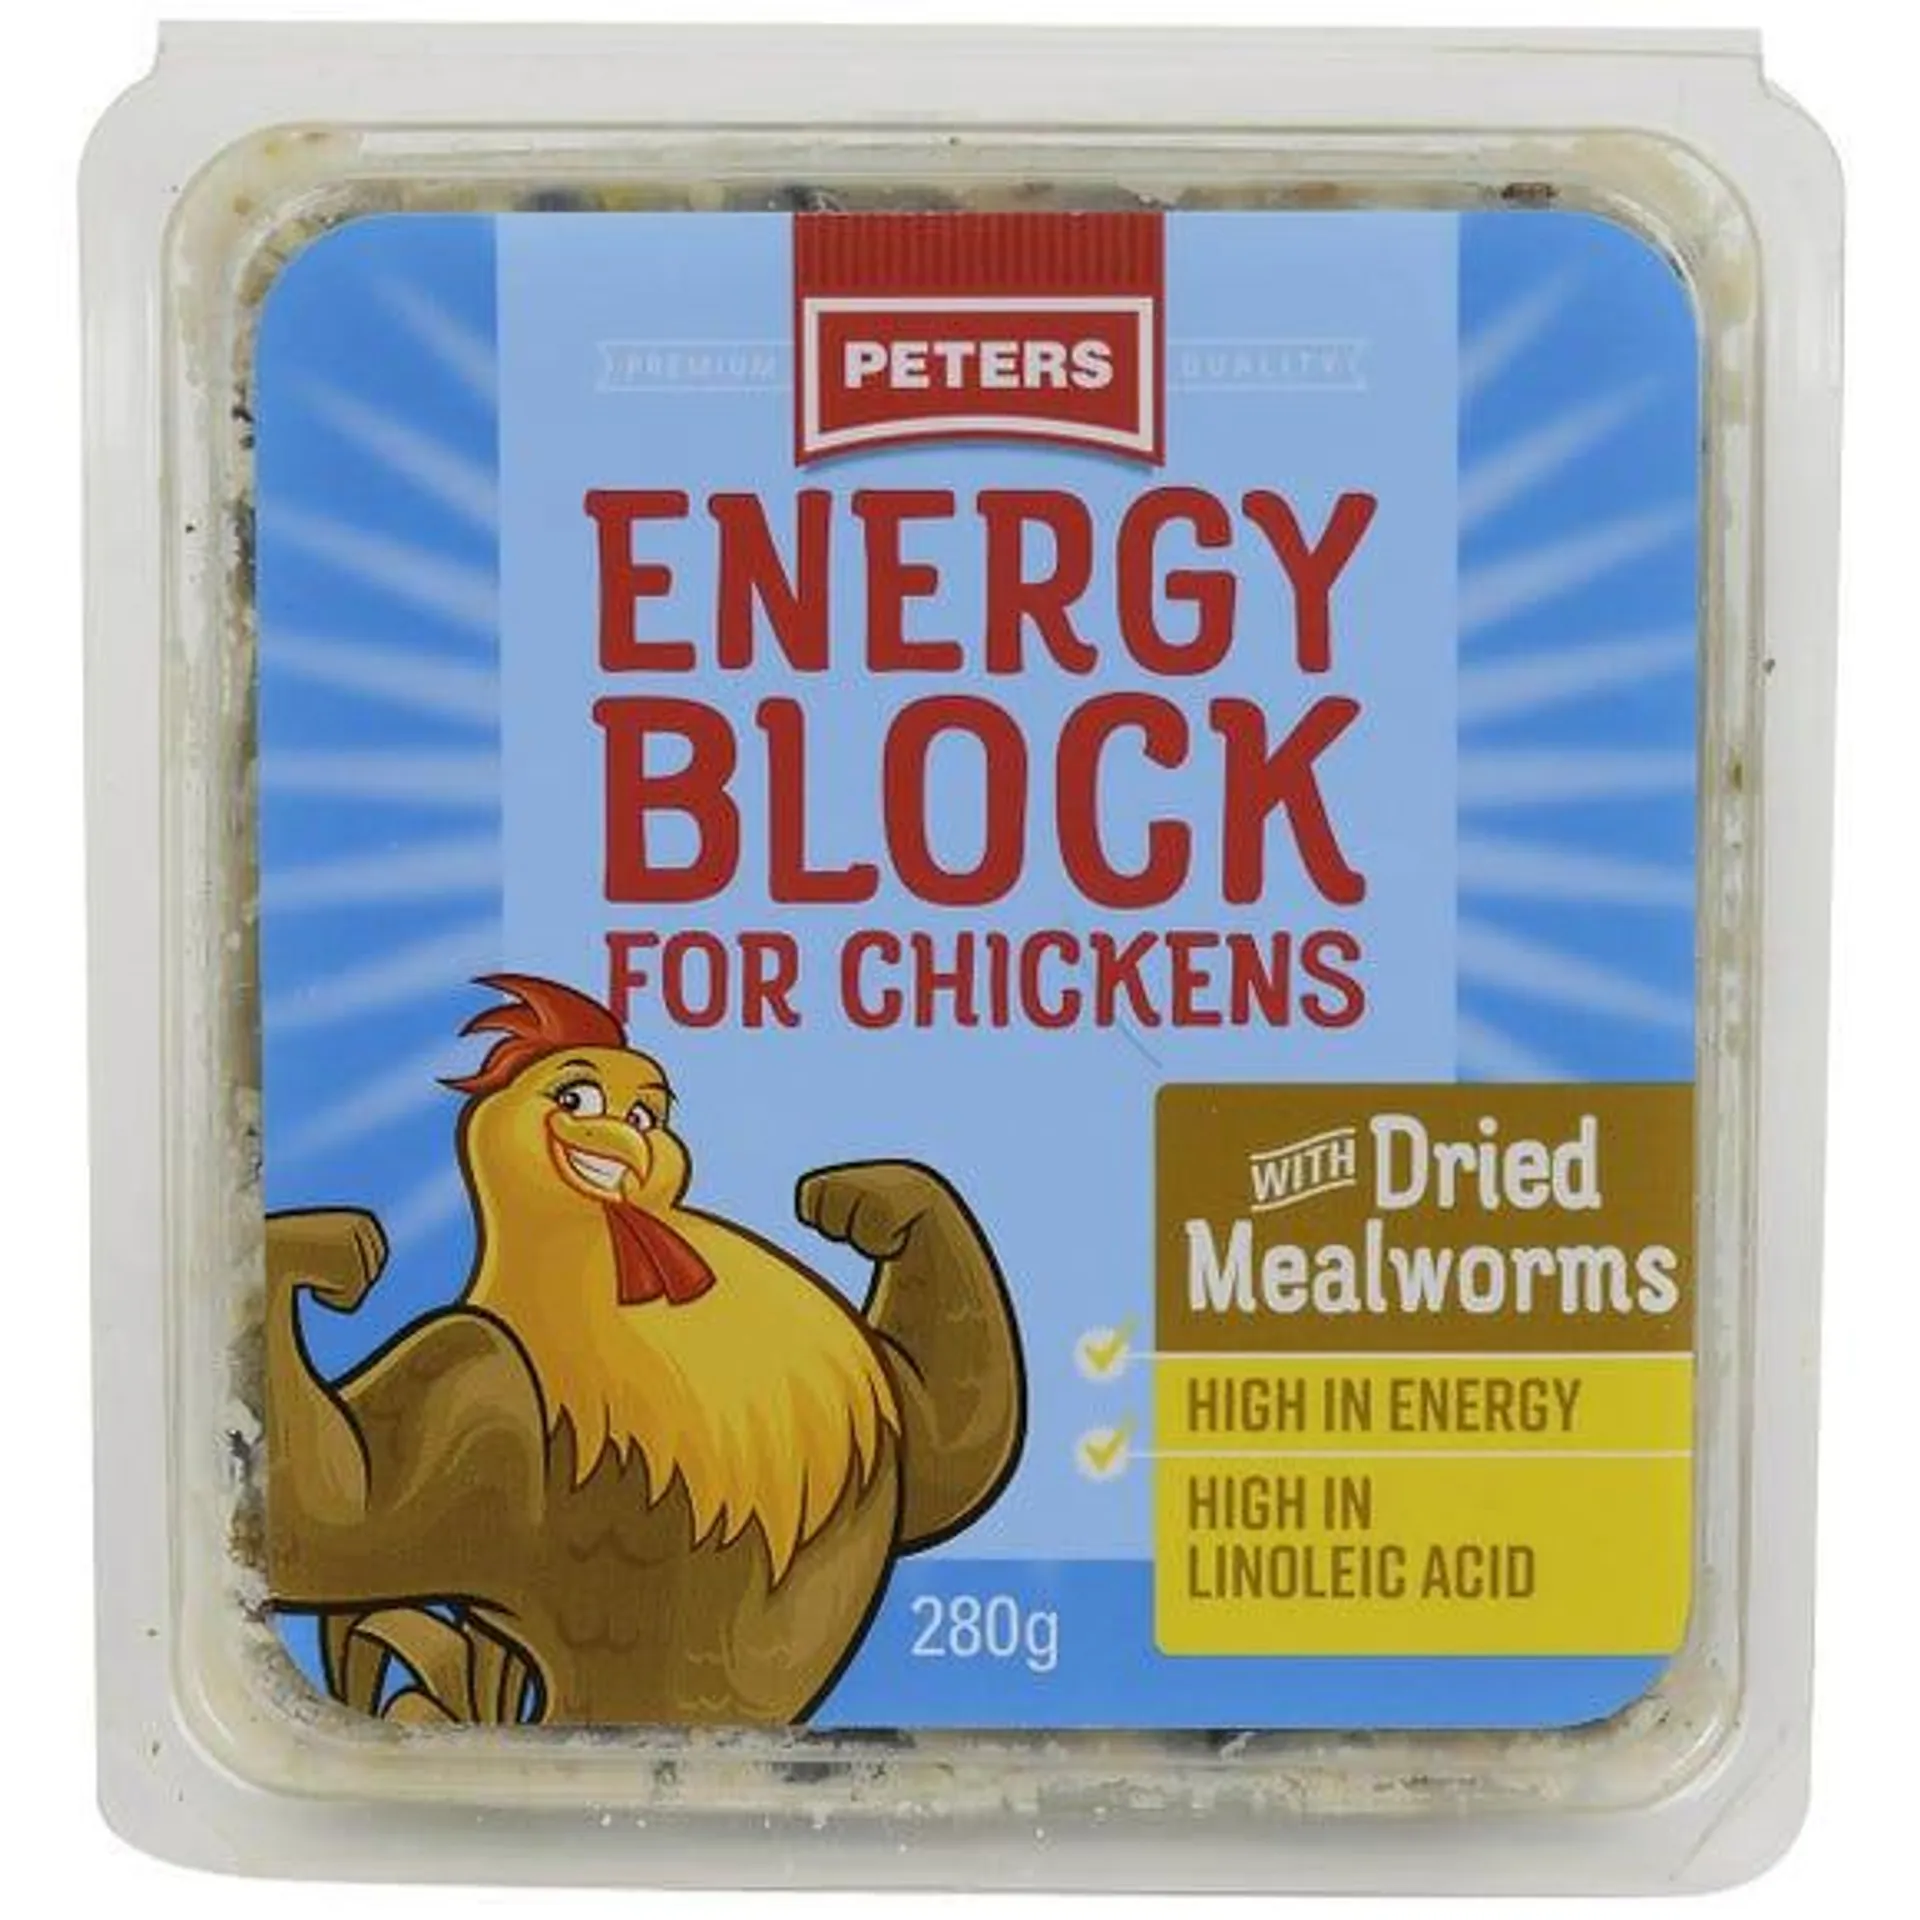 Peters Energy Block For Chickens With Dried Mealworms